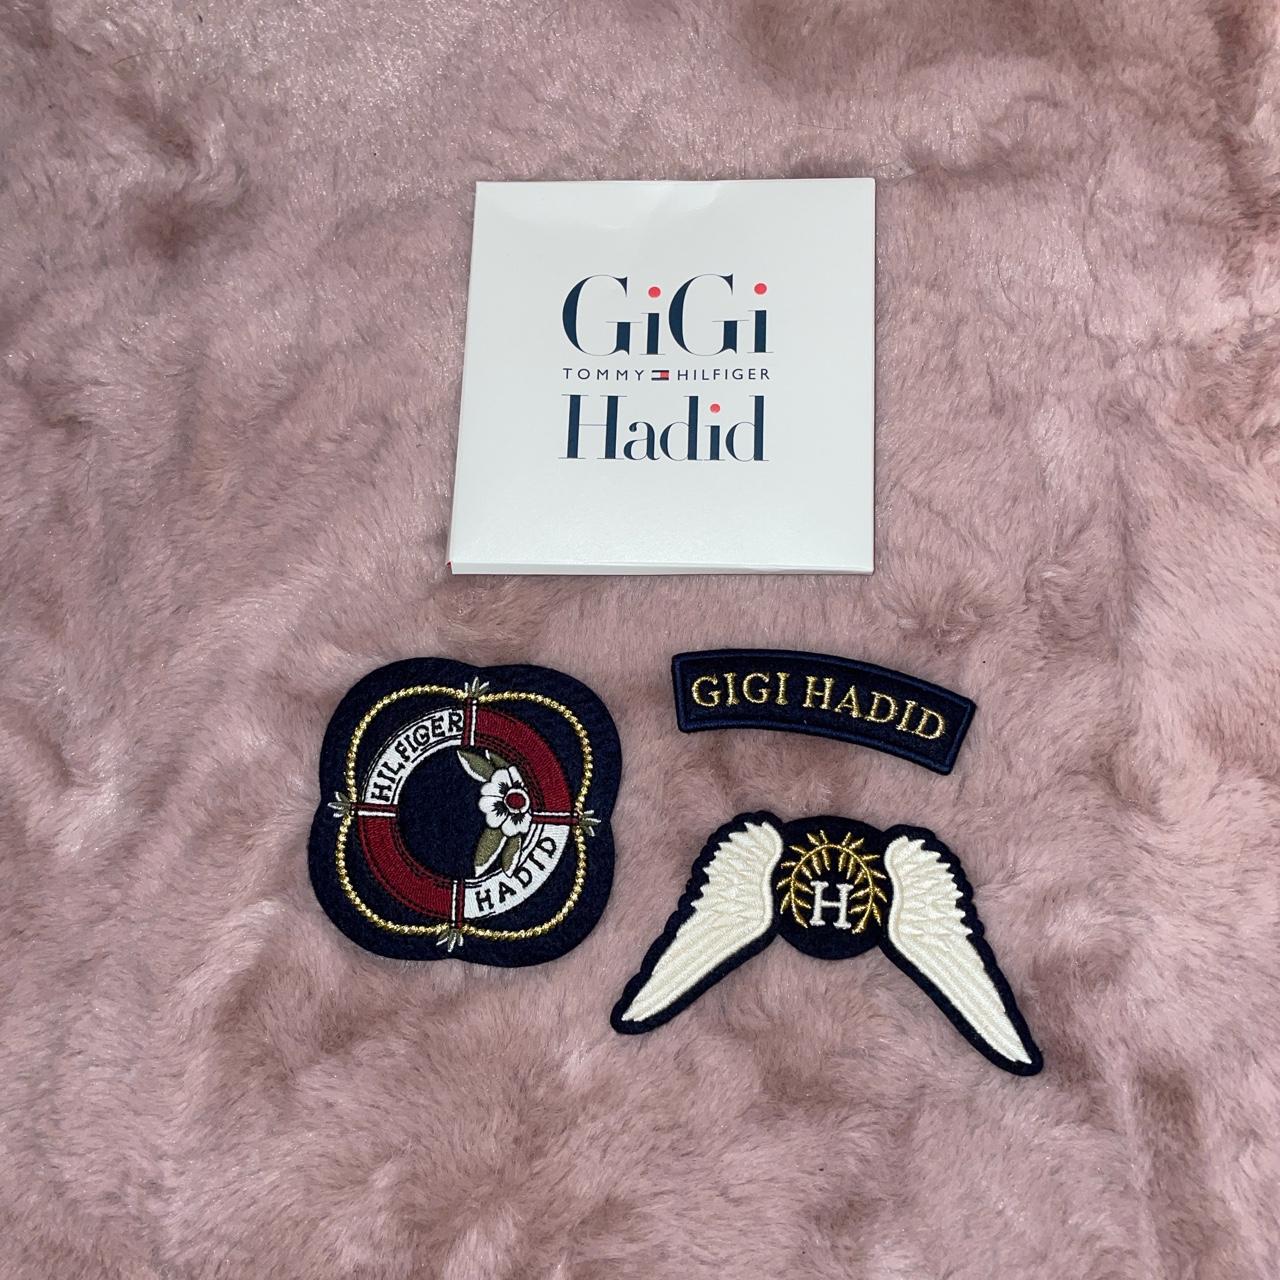 GiGi Hadid Tommy Hilfiger Patches and tommy Pier Anchor Keychain